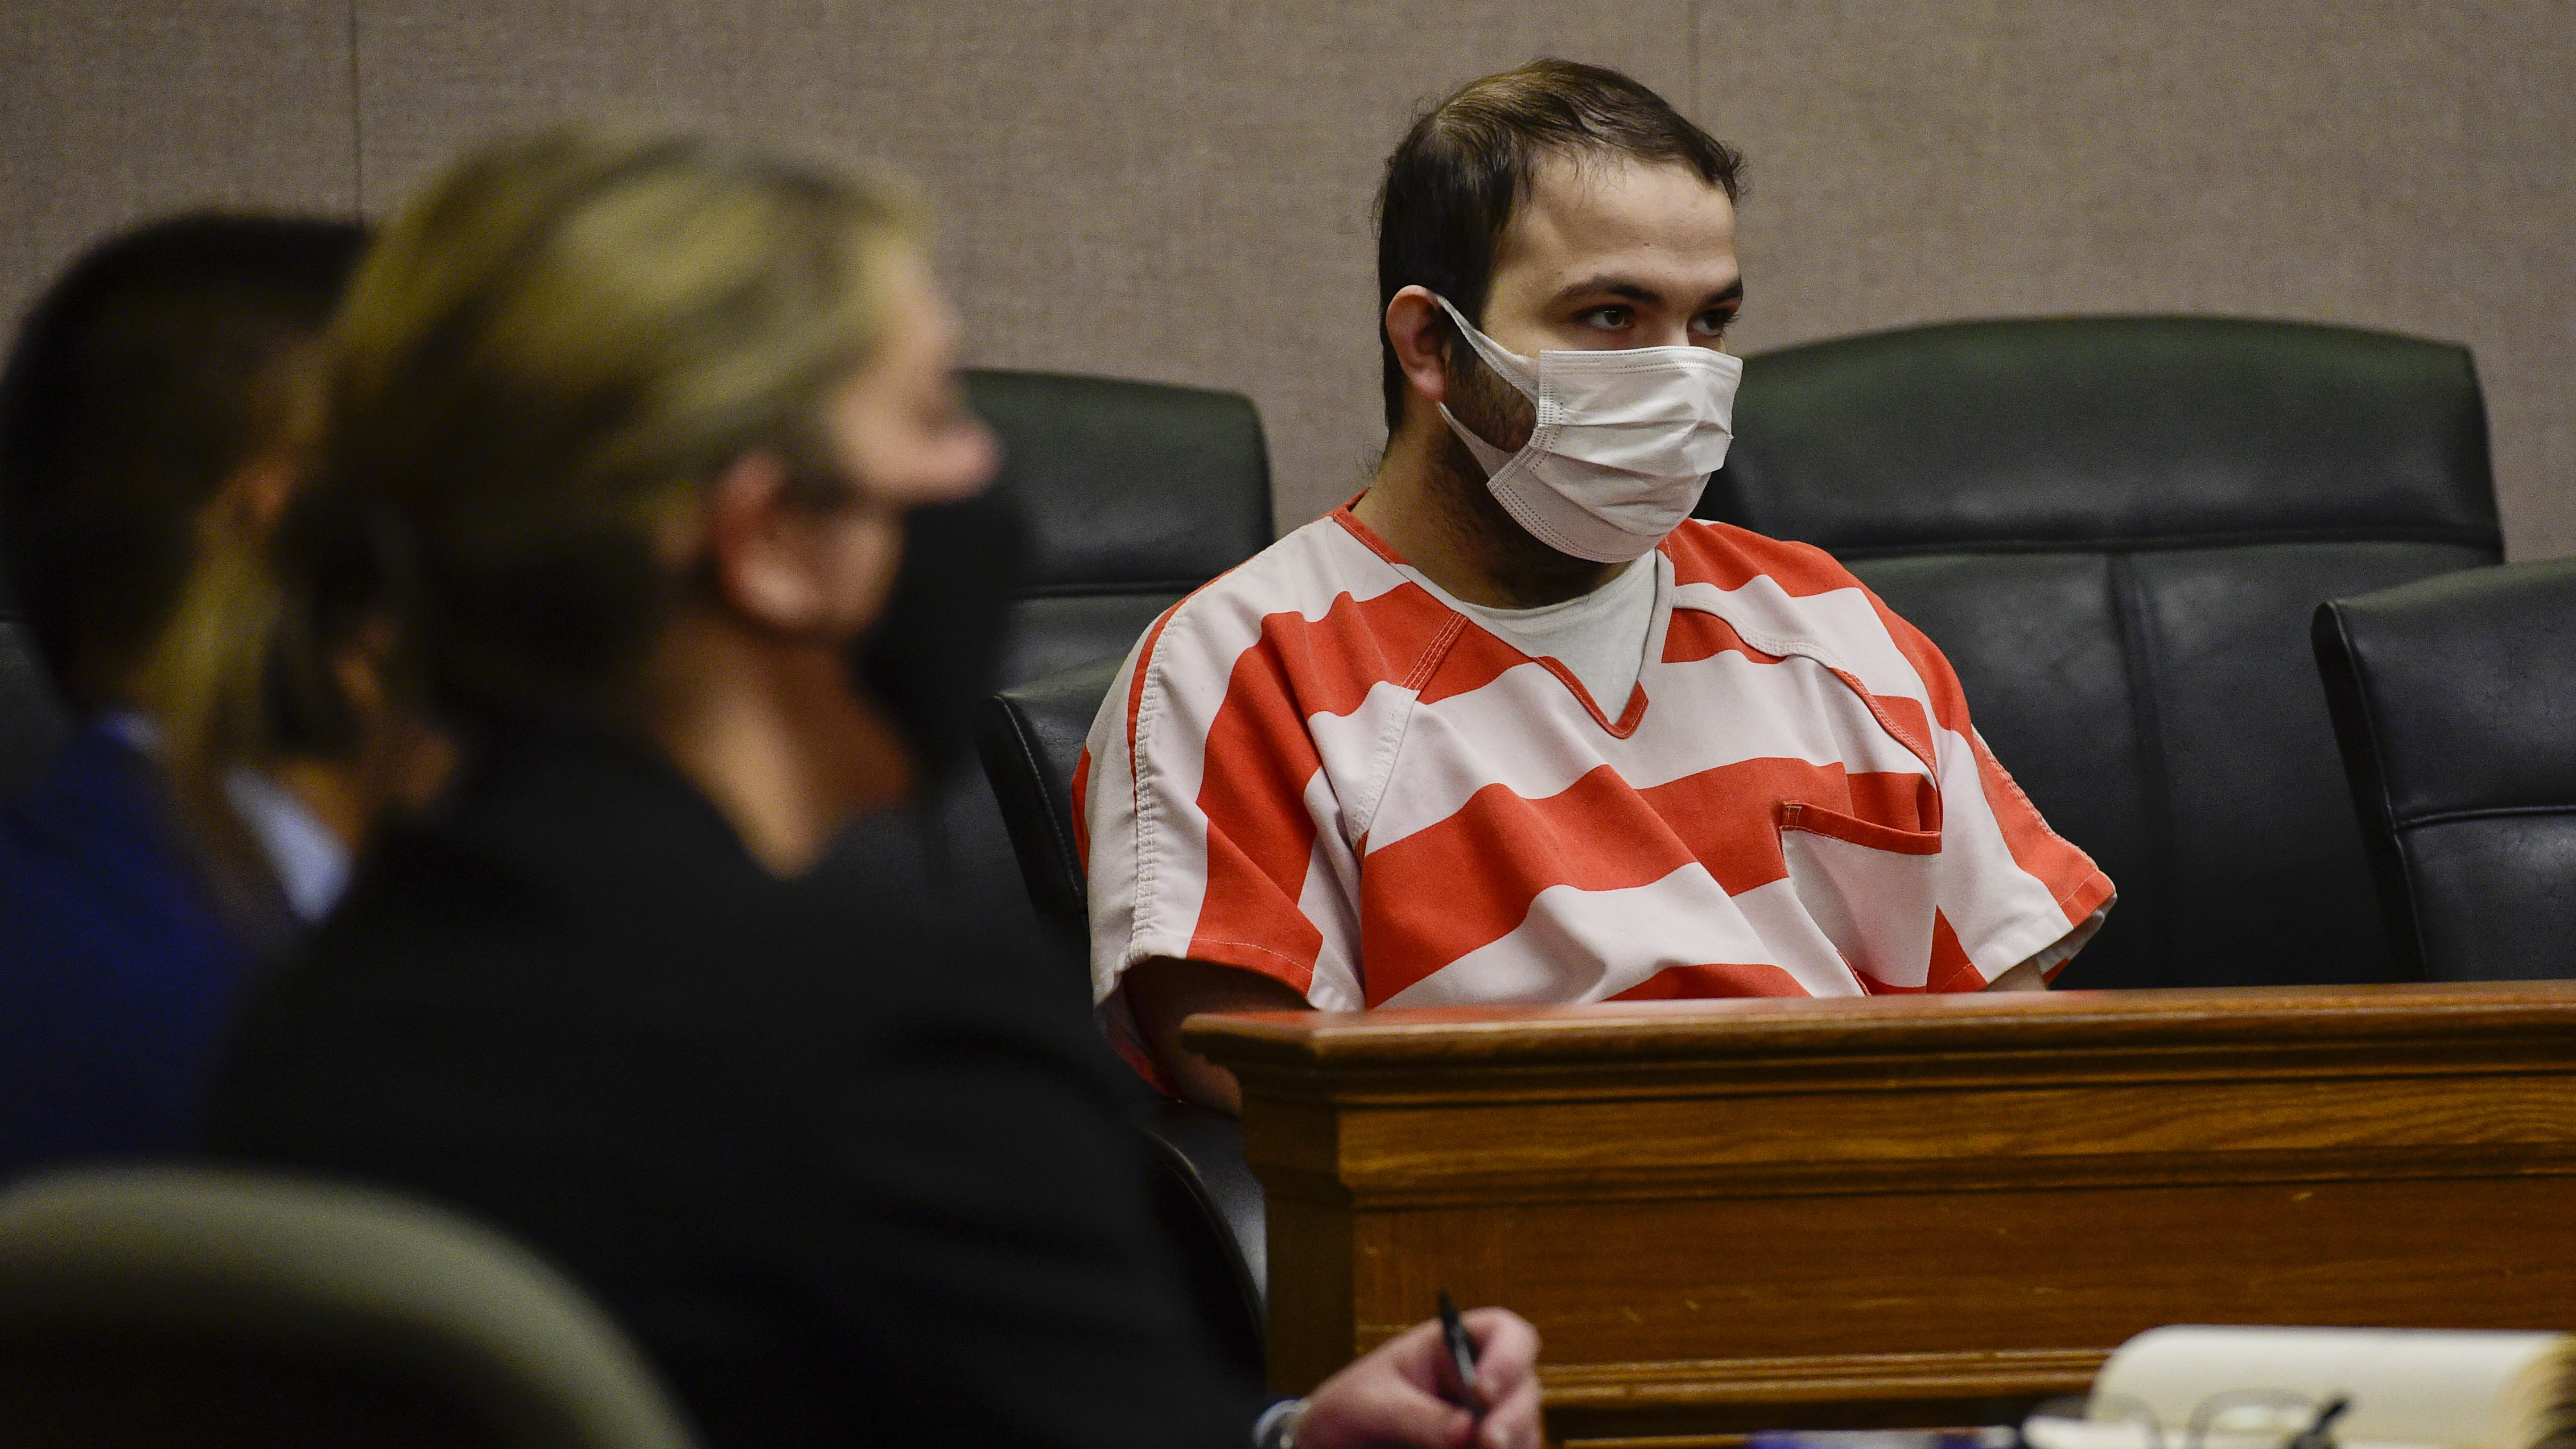 Ahmad Al Aliwi Alissa appears in a Boulder County District courtroom at the Boulder County Justice Center on May 25.